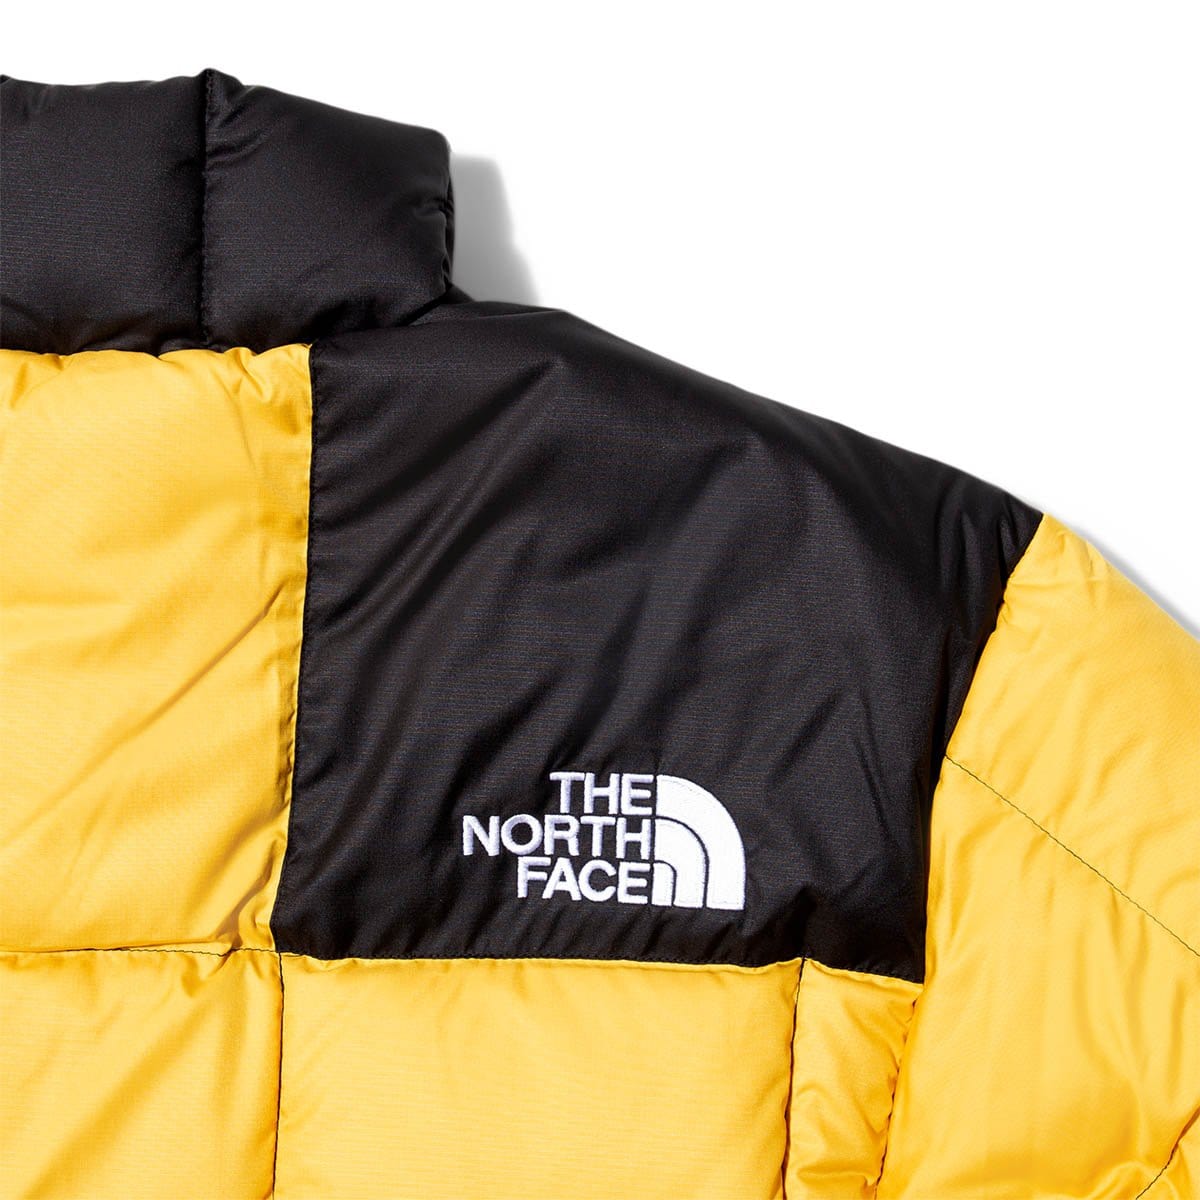 The North Face Black Series Outerwear LHOTSE JACKET